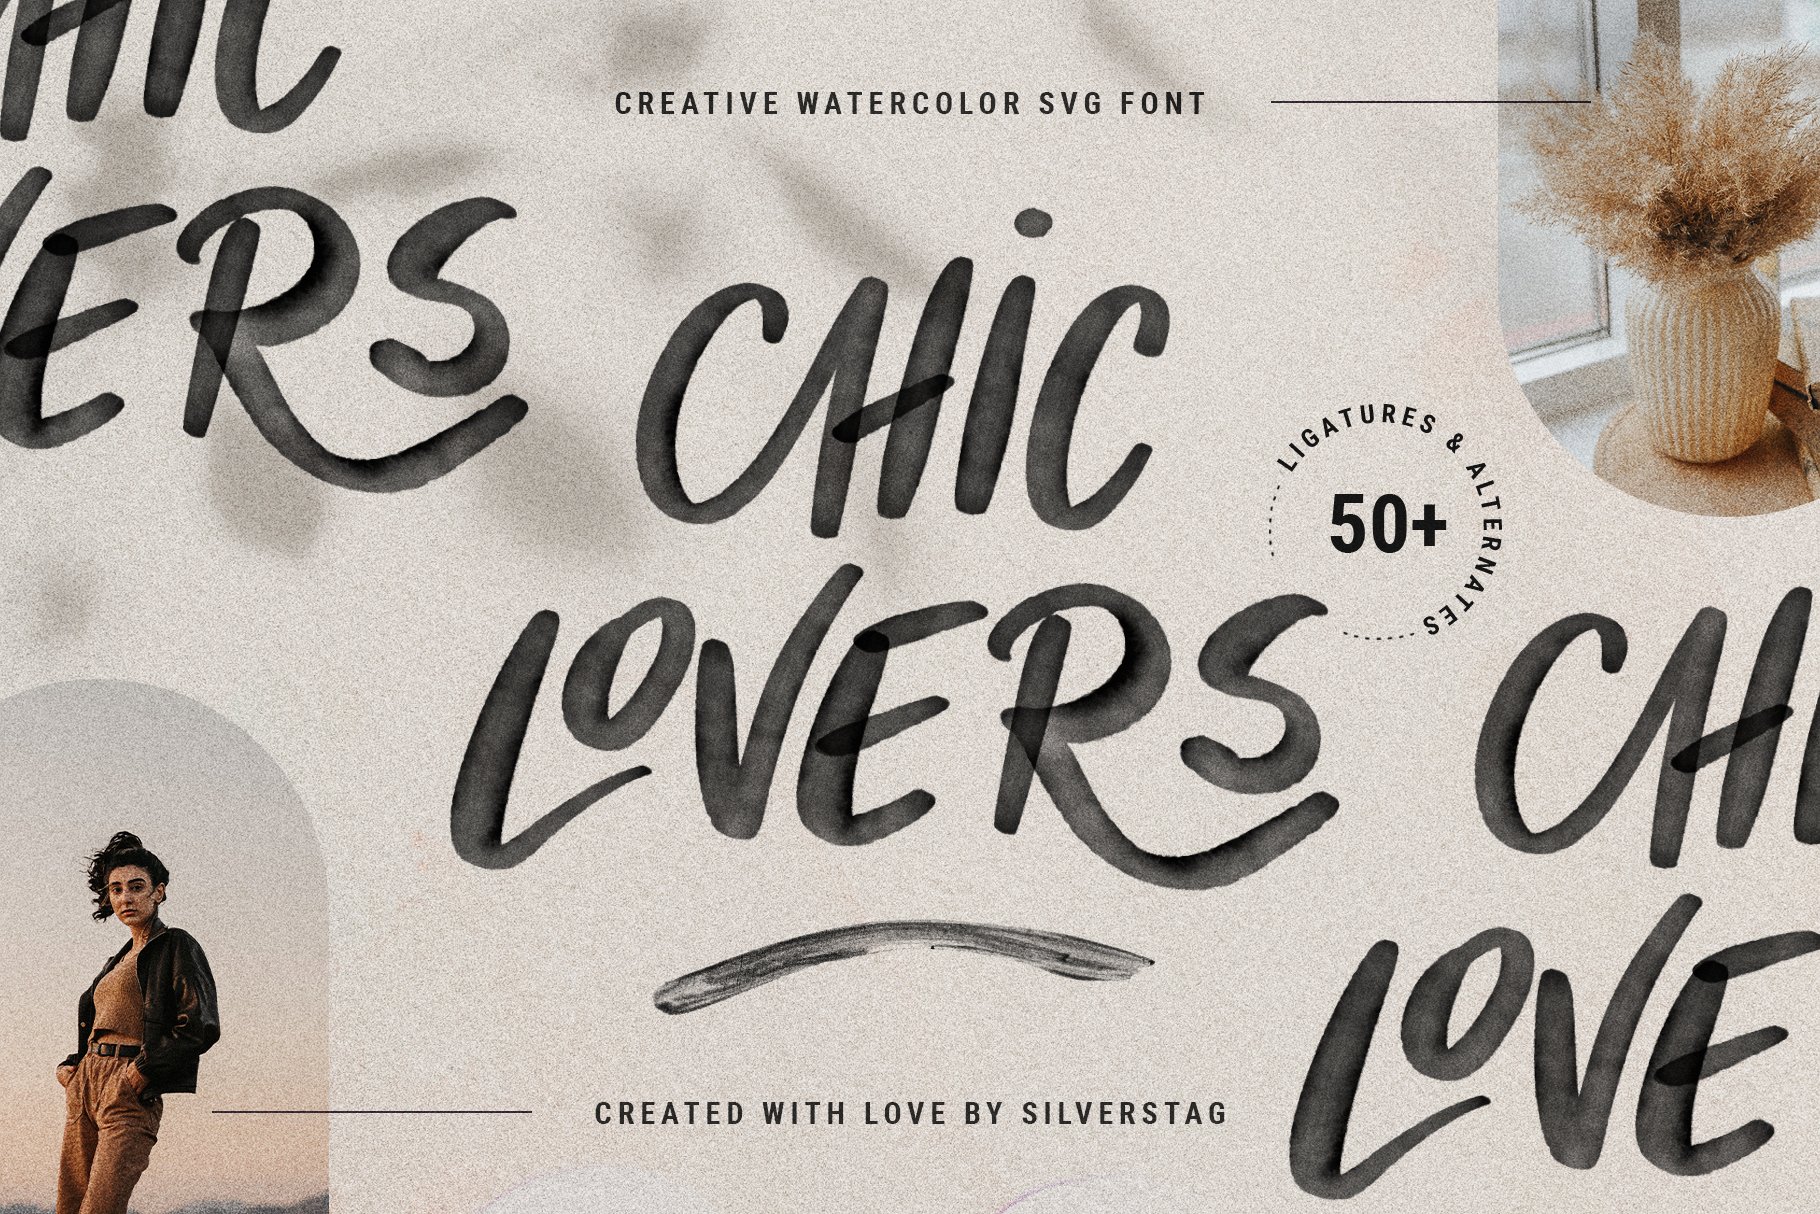 So creative font for modern projects.